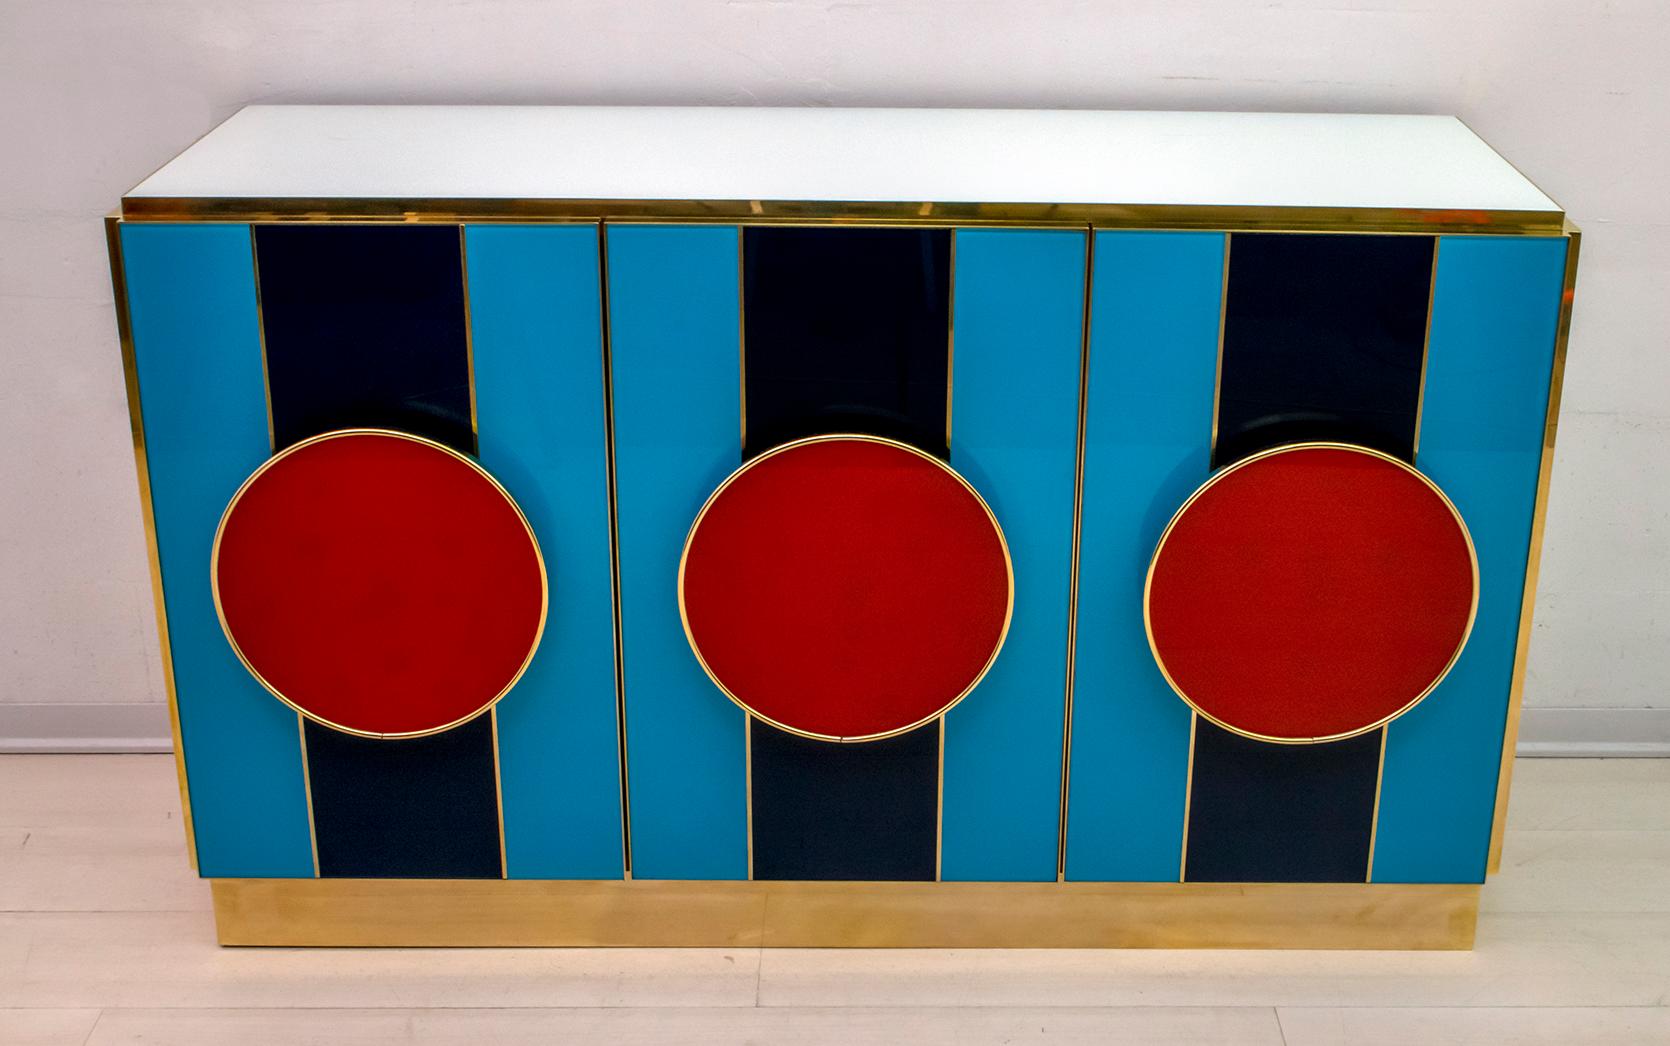 An interesting colorful Postmodern piece with a Pop Art touch, sideboard / bar cabinet, very fun Italian, design with 3 front doors in blue and light blue glass, like handles two circles in red glass, which highlight the brass finishes. The rest of